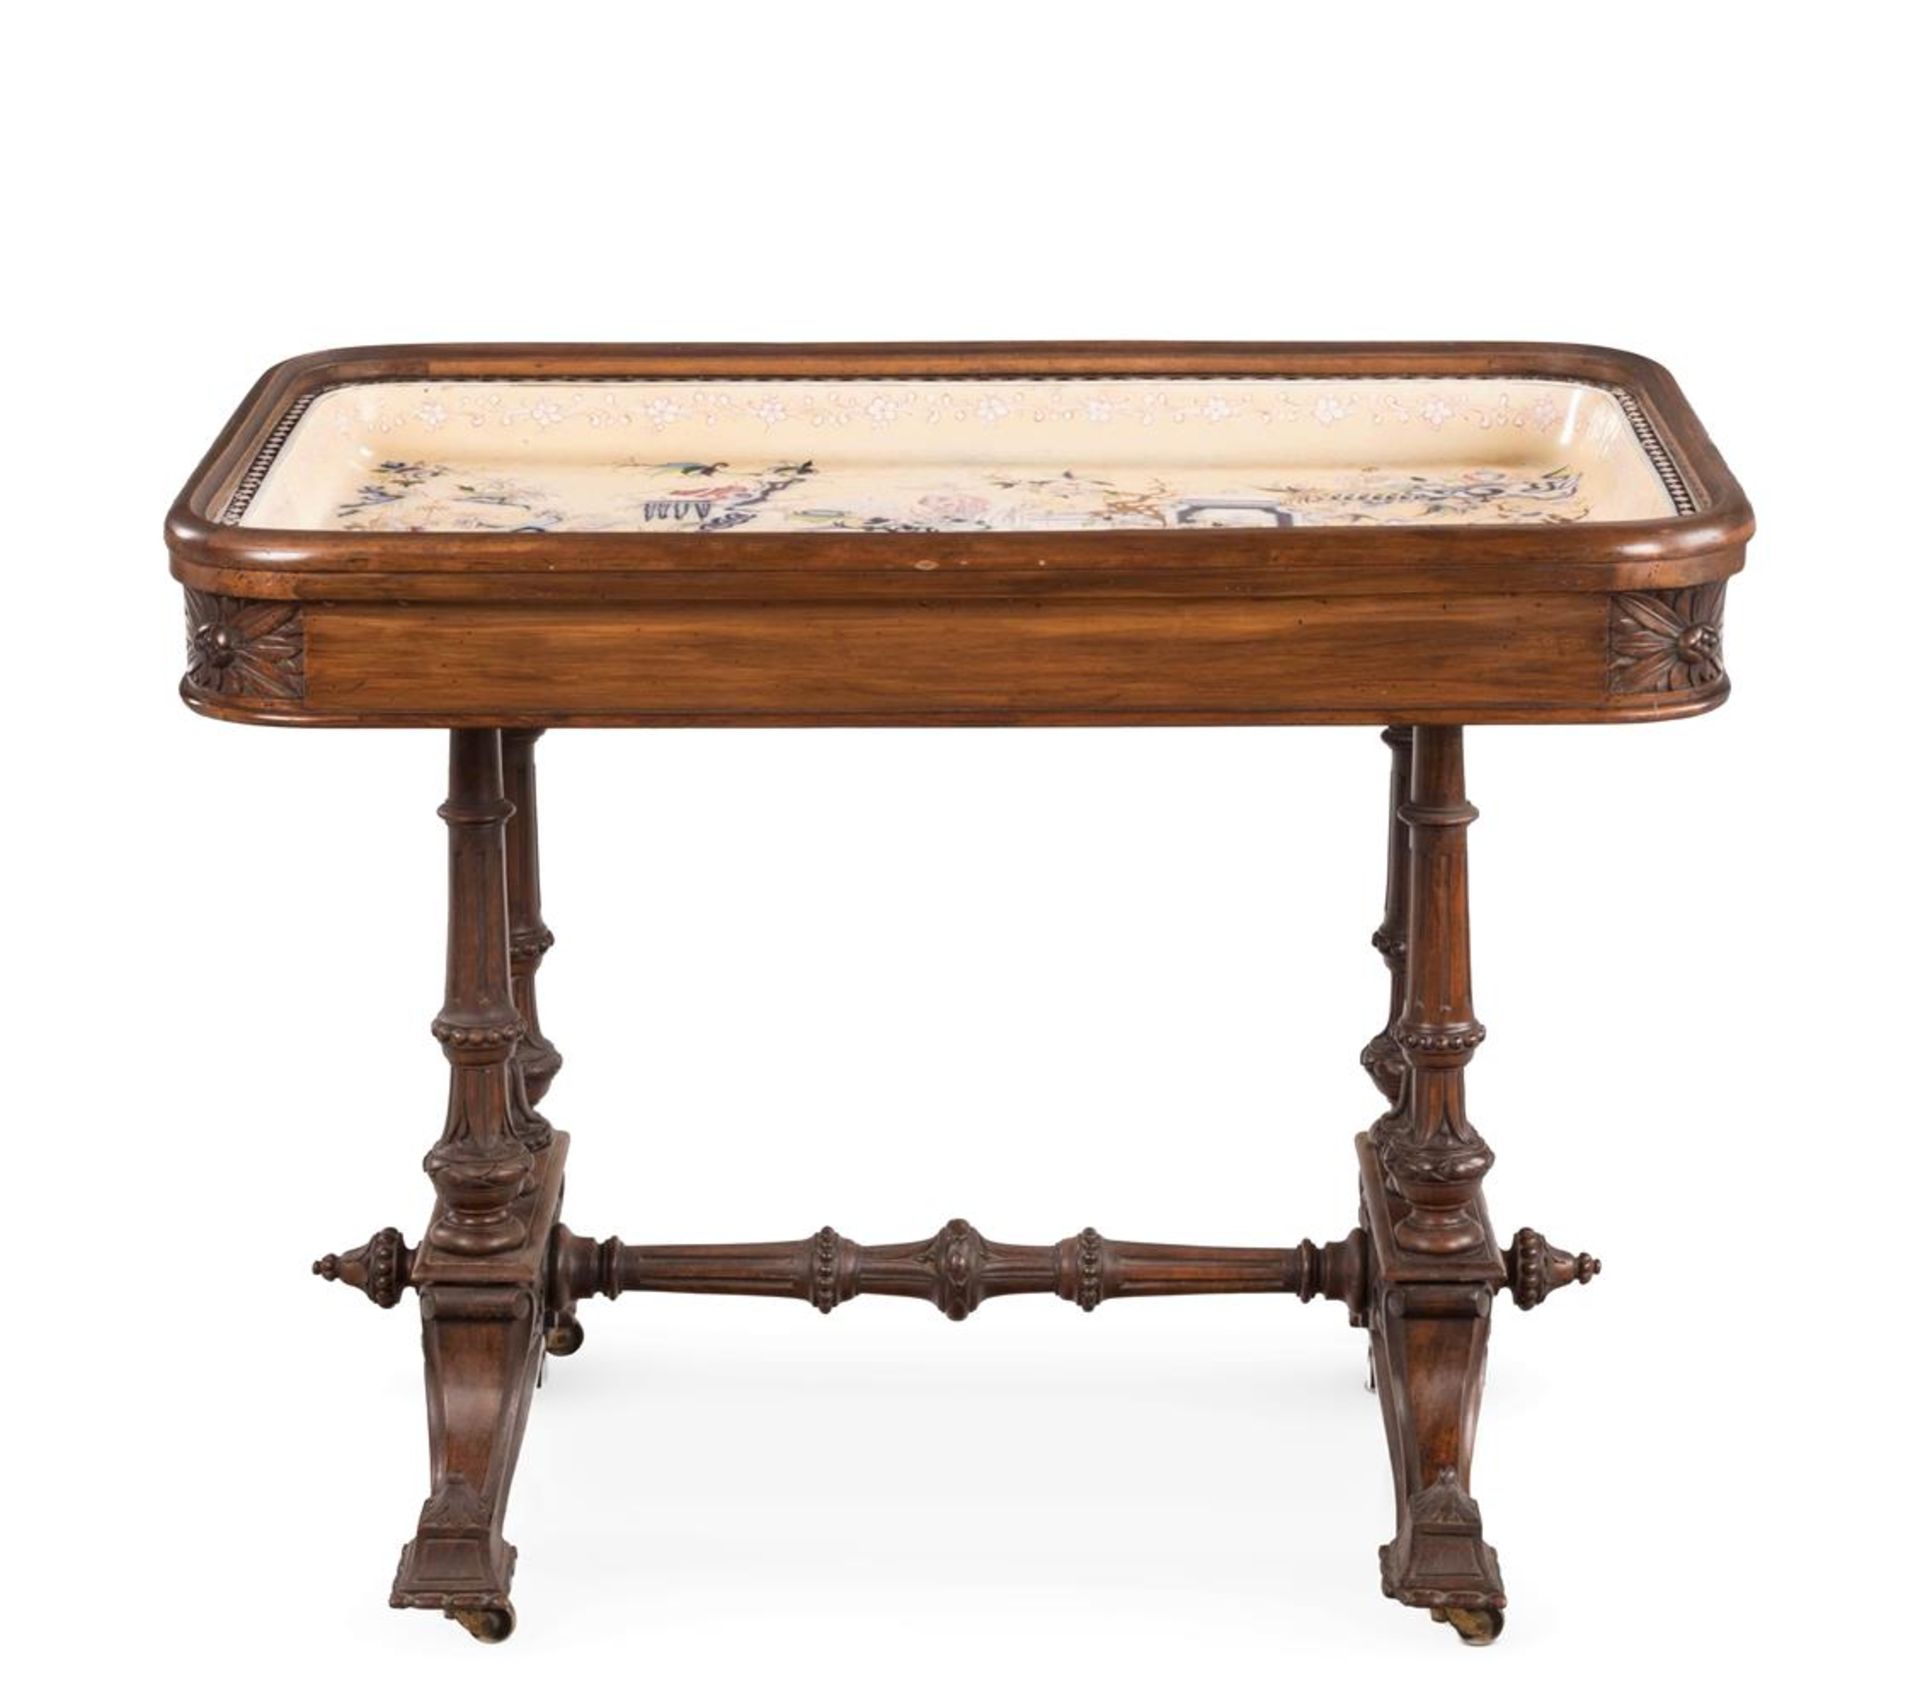 A VICTORIAN WALNUT BASIN OR JARDINIERE STAND, LATE 19TH CENTURY - Image 3 of 6